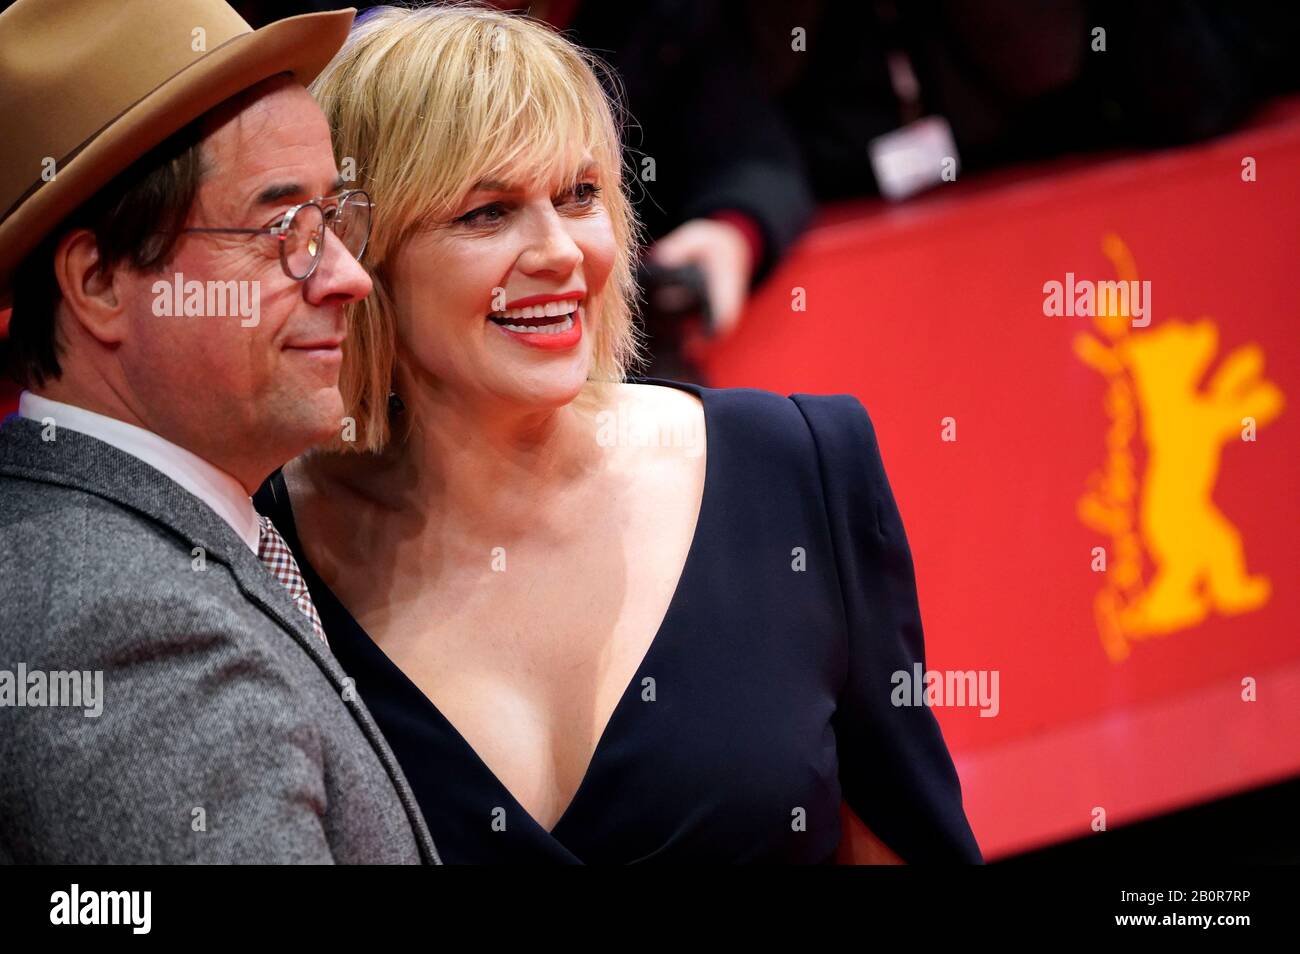 Berlin, Germany. 20th Feb, 2020. Jan Josef Liefers and Anna Loos attending the 'My Salinger Year' premiere at the 70th Berlin International Film Festival/Berlinale 2020 at Berlinale Palast on February 20, 2020 in Berlin, Germany. Credit: Geisler-Fotopress GmbH/Alamy Live News Stock Photo